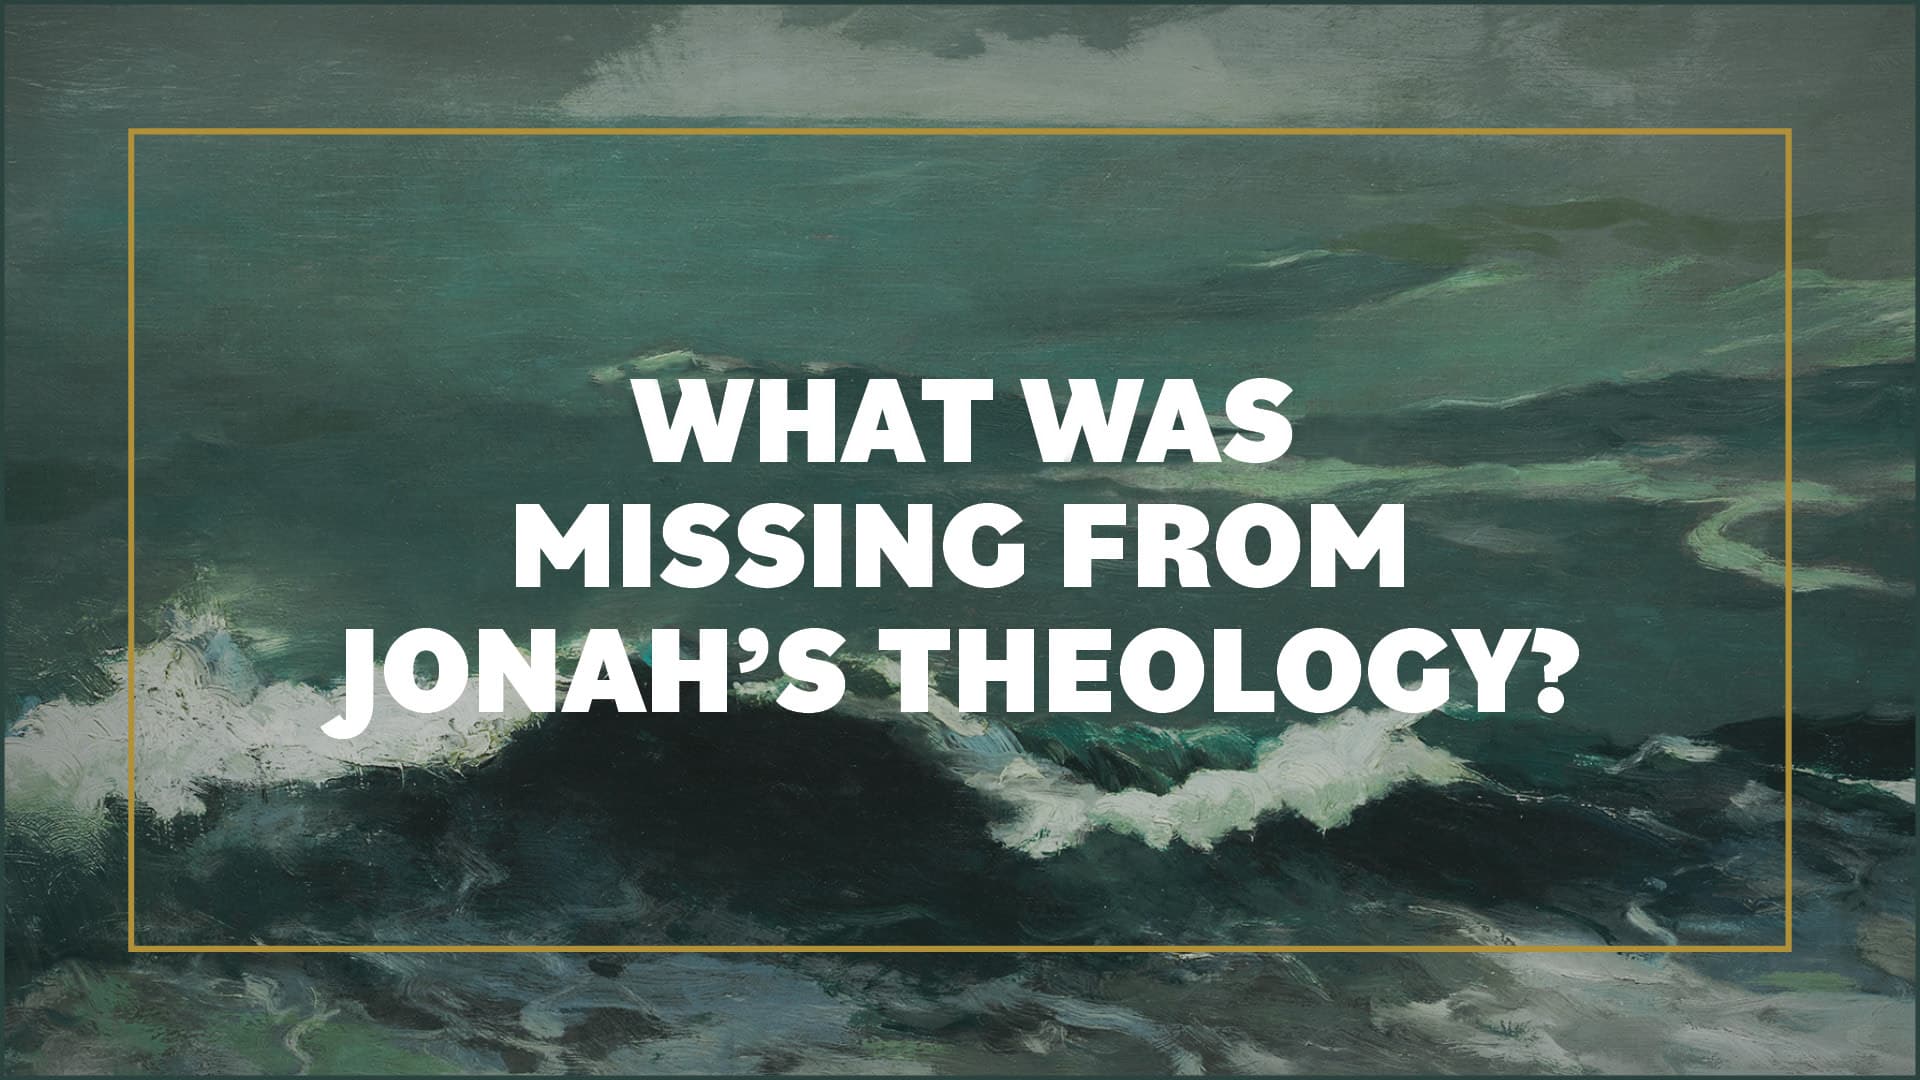 What exactly was missing from Jonah’s theology?